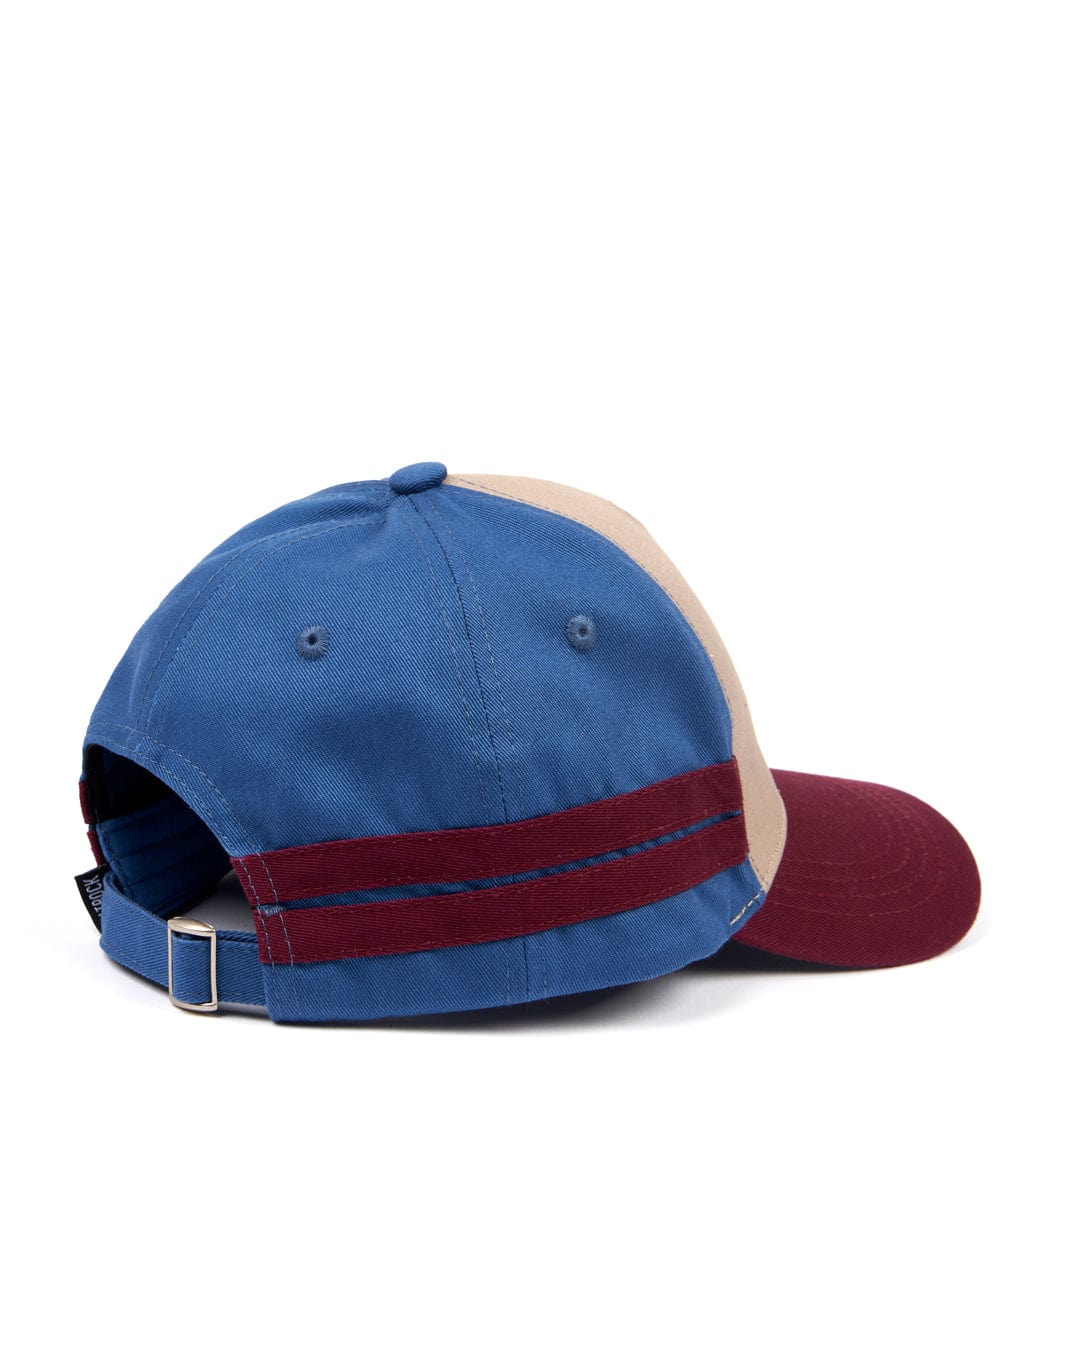 A Strike baseball cap with an adjustable strap and the Saltrock branding.